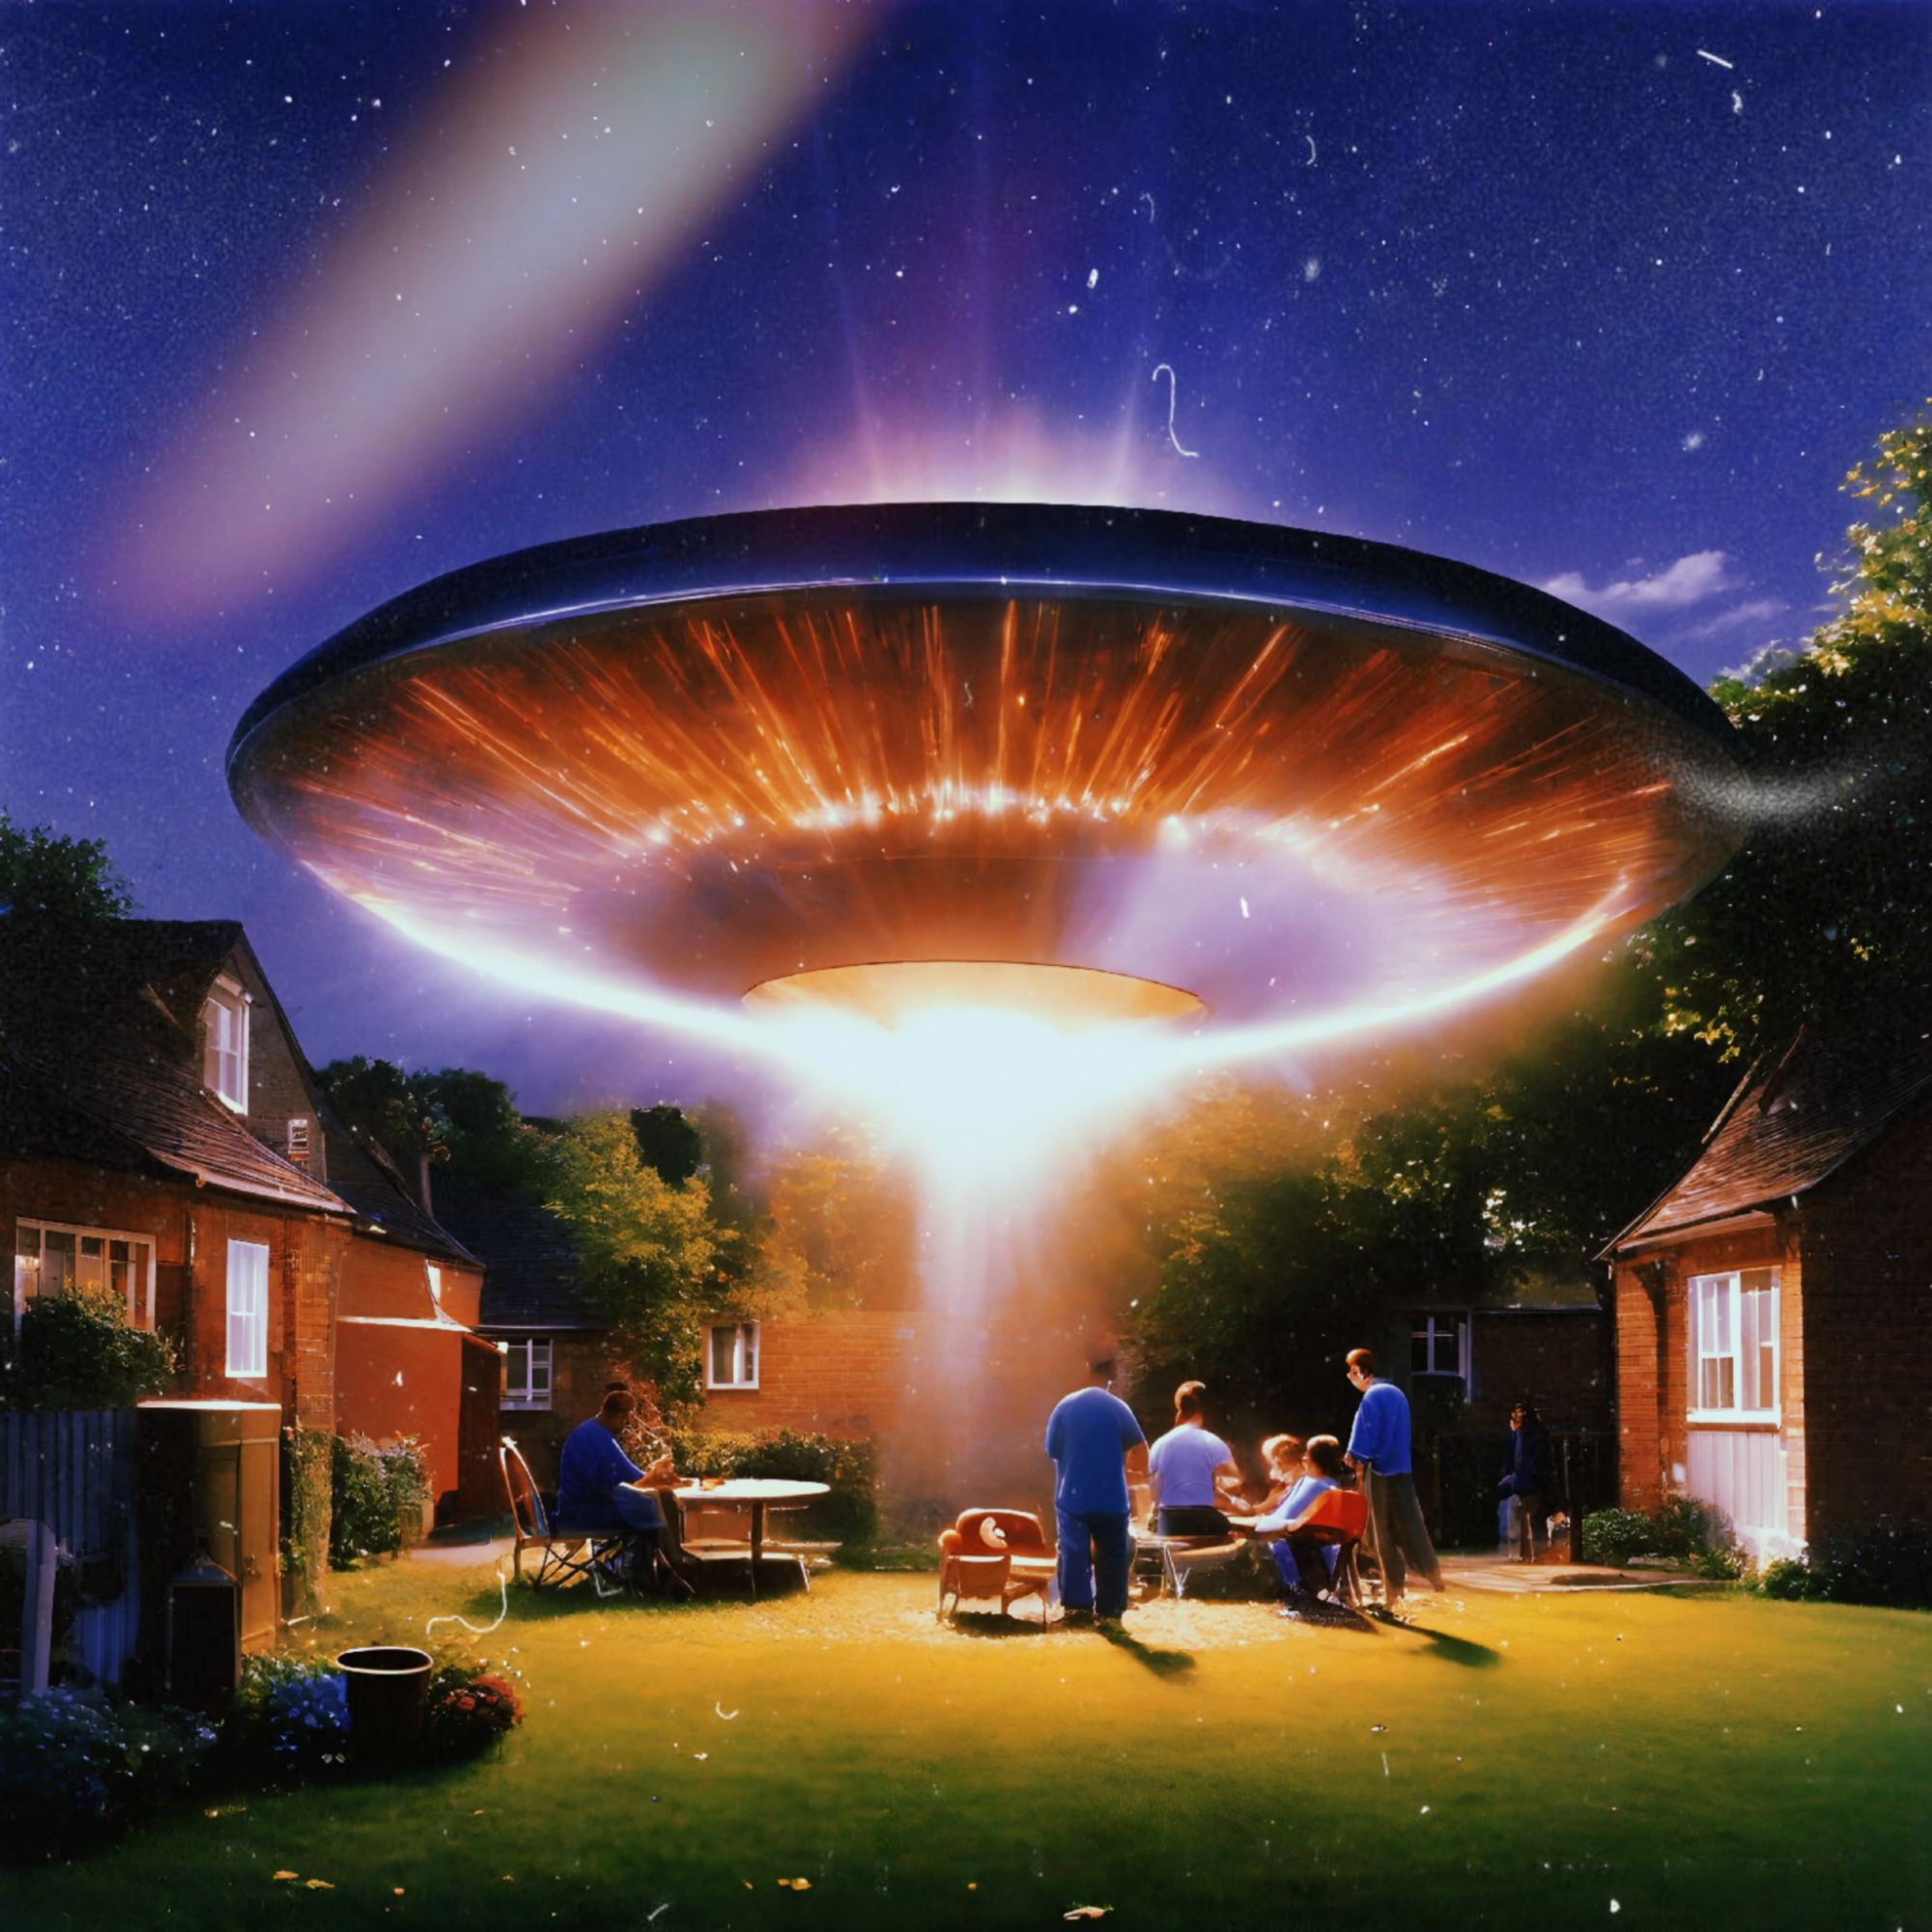 Alien Abduction at Neighborhood BBQ Cookout